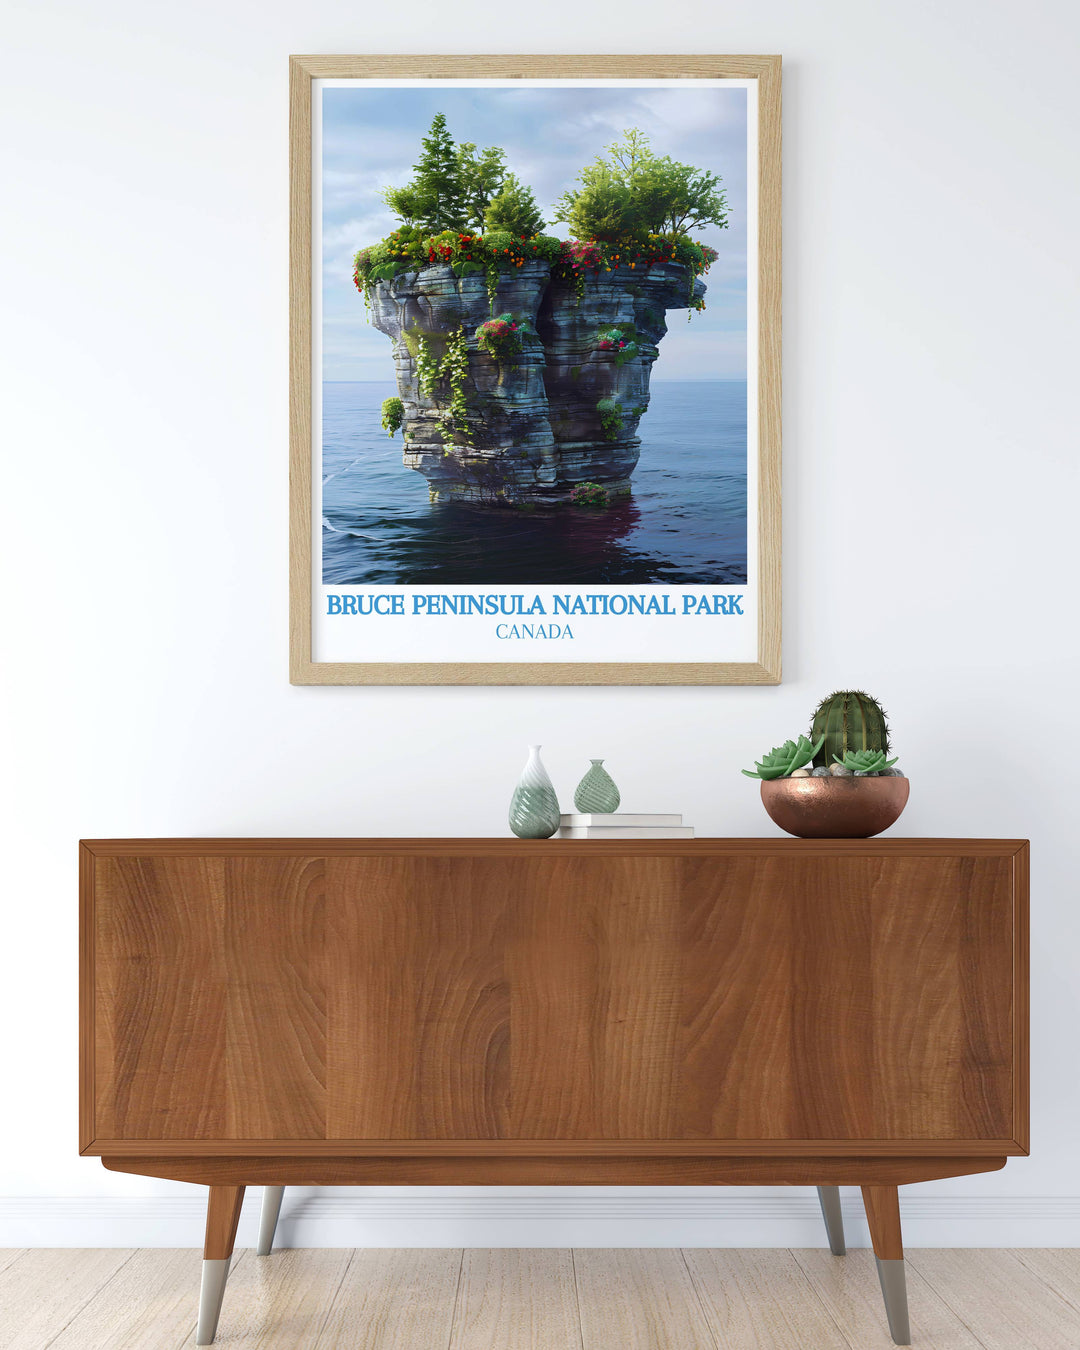 The Flowerpot Island Wall Art beautifully depicts the distinctive rock formations and serene waters of this Canadian treasure adding elegance and tranquility to any room in your home with its detailed craftsmanship